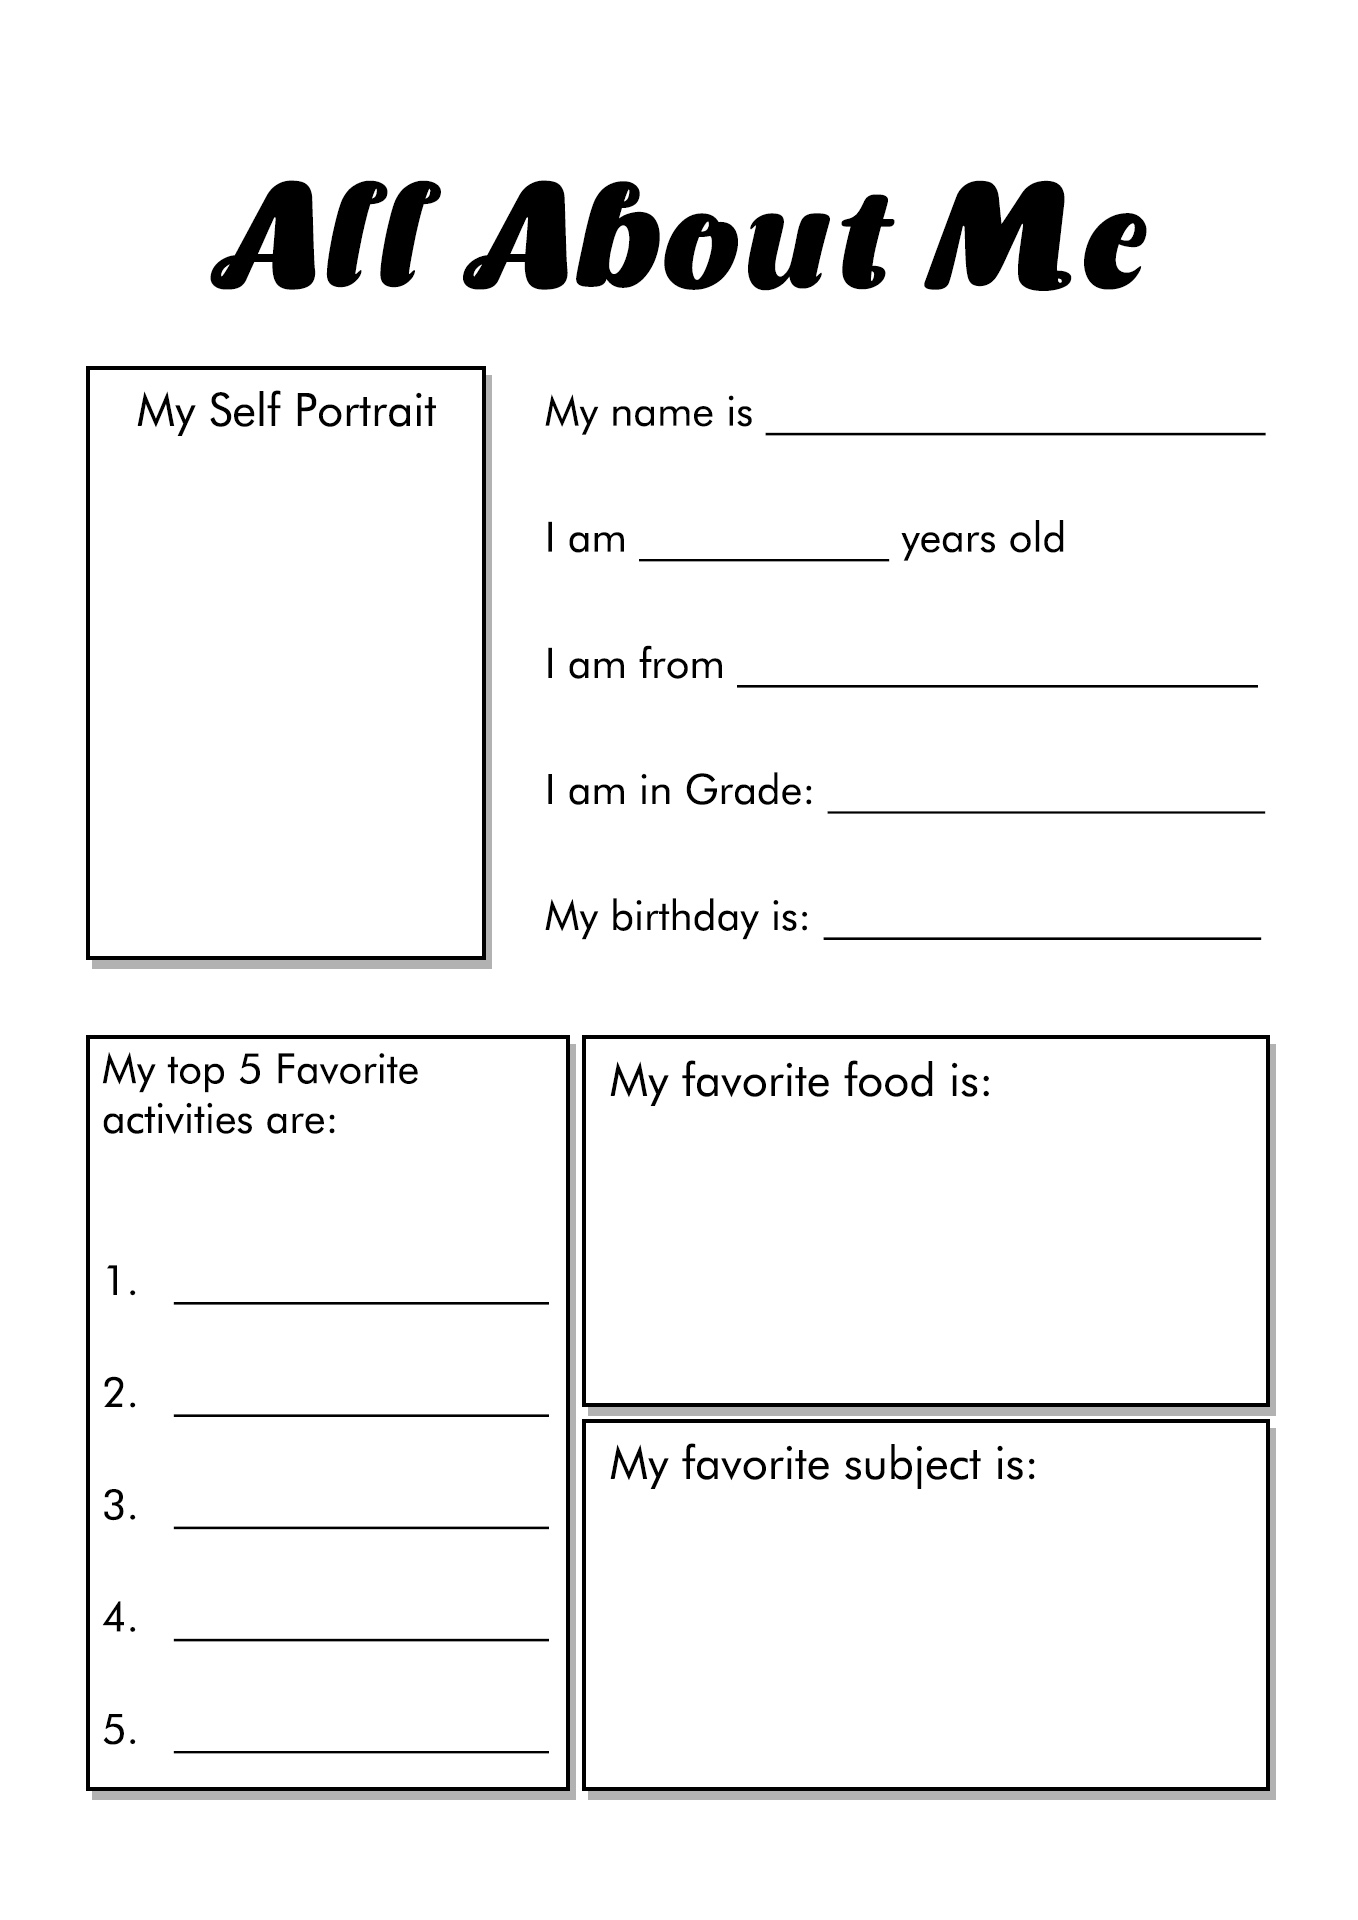 All About Me Worksheets Printables Image